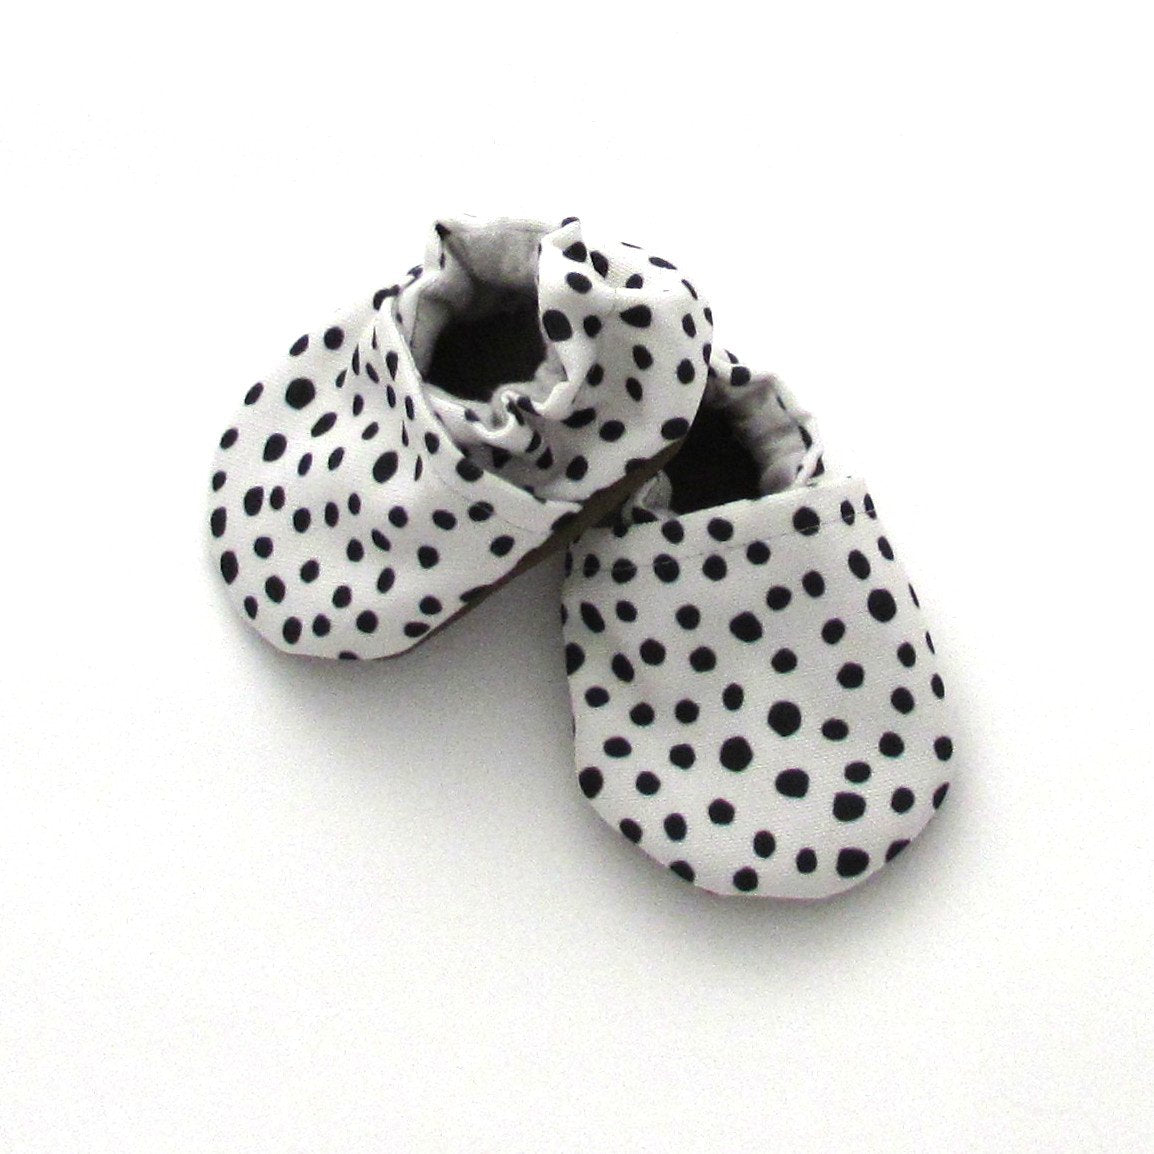 Black and white dot baby first shoes for walking